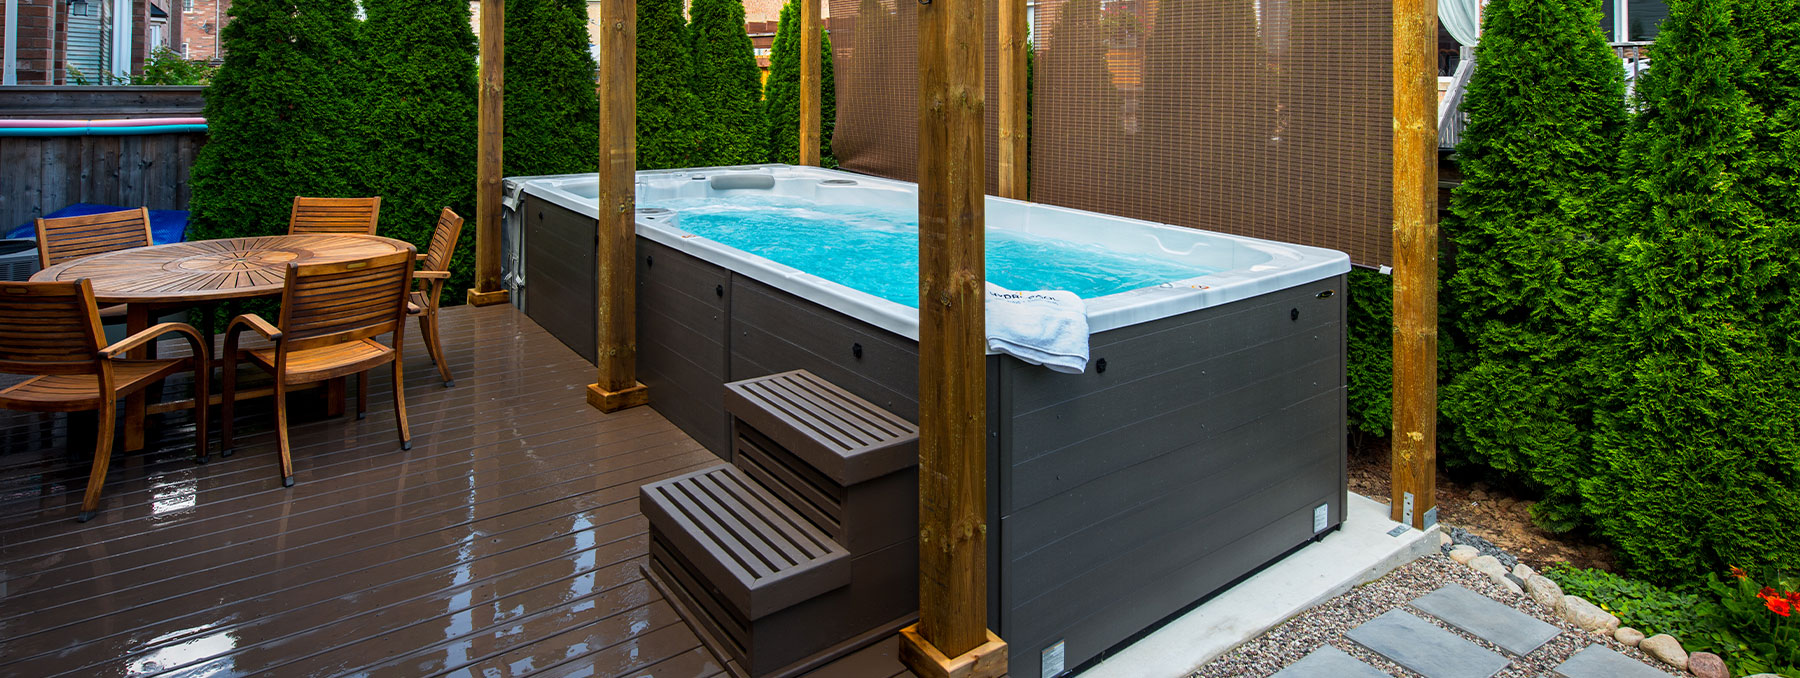 How much does a swim spa cost, including the initial purchase, installation, and ongoing maintenance?